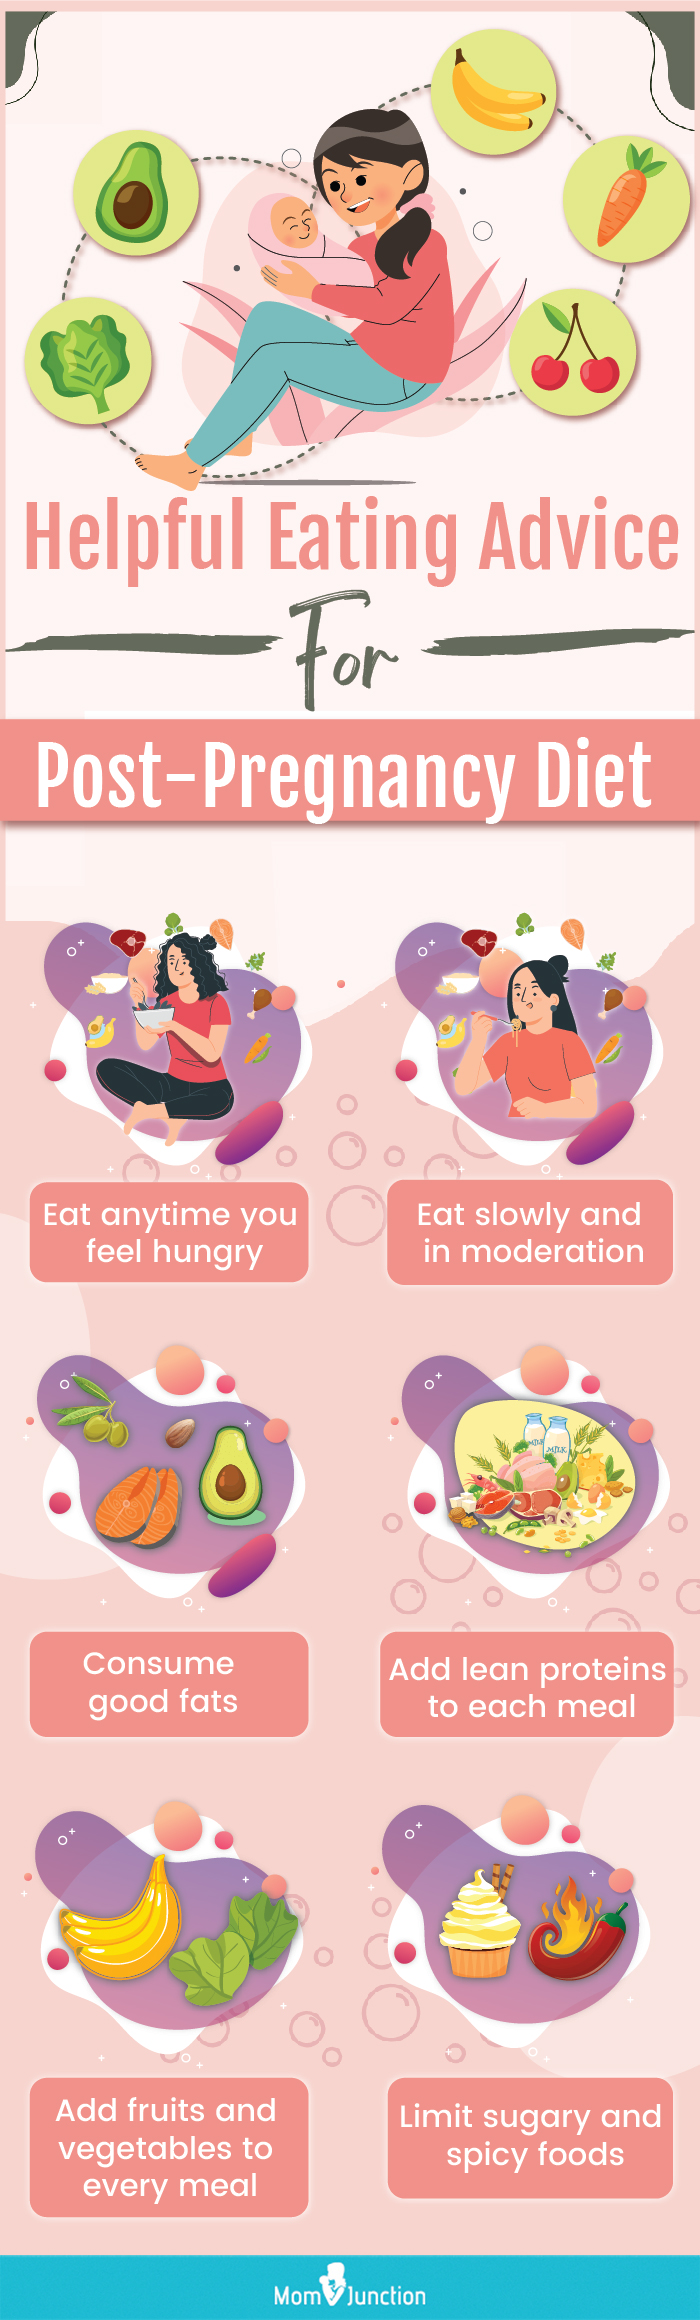 eating advice for post pregnancy diet [infographic]